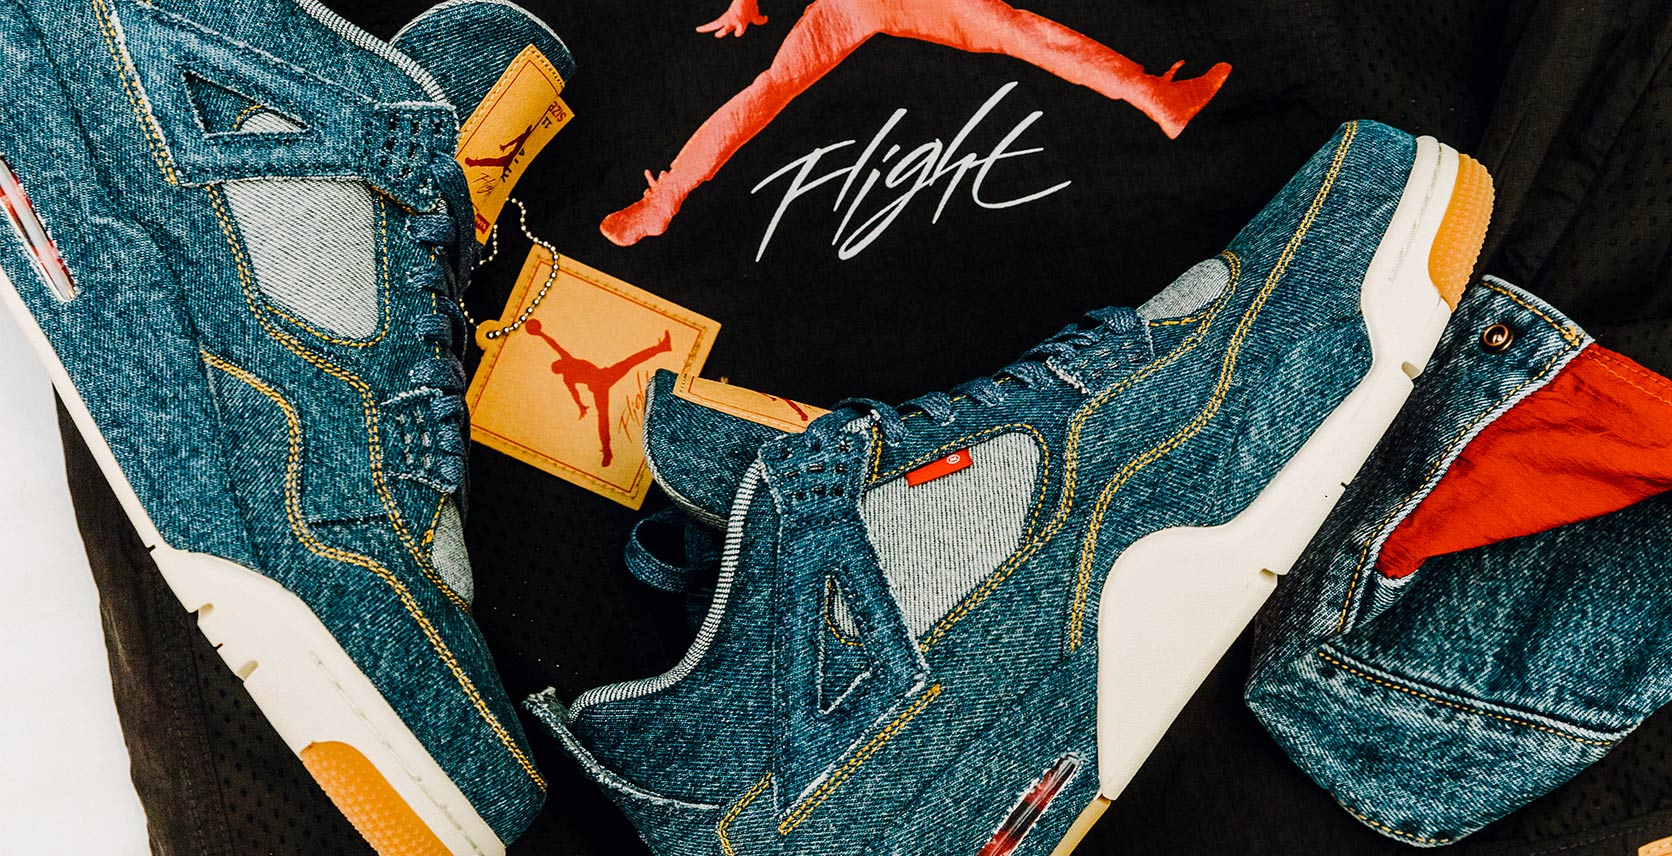 This Levi's x Air Jordan Collaboration Is So Hot the Police Had to Get  Involved - Sharp Magazine